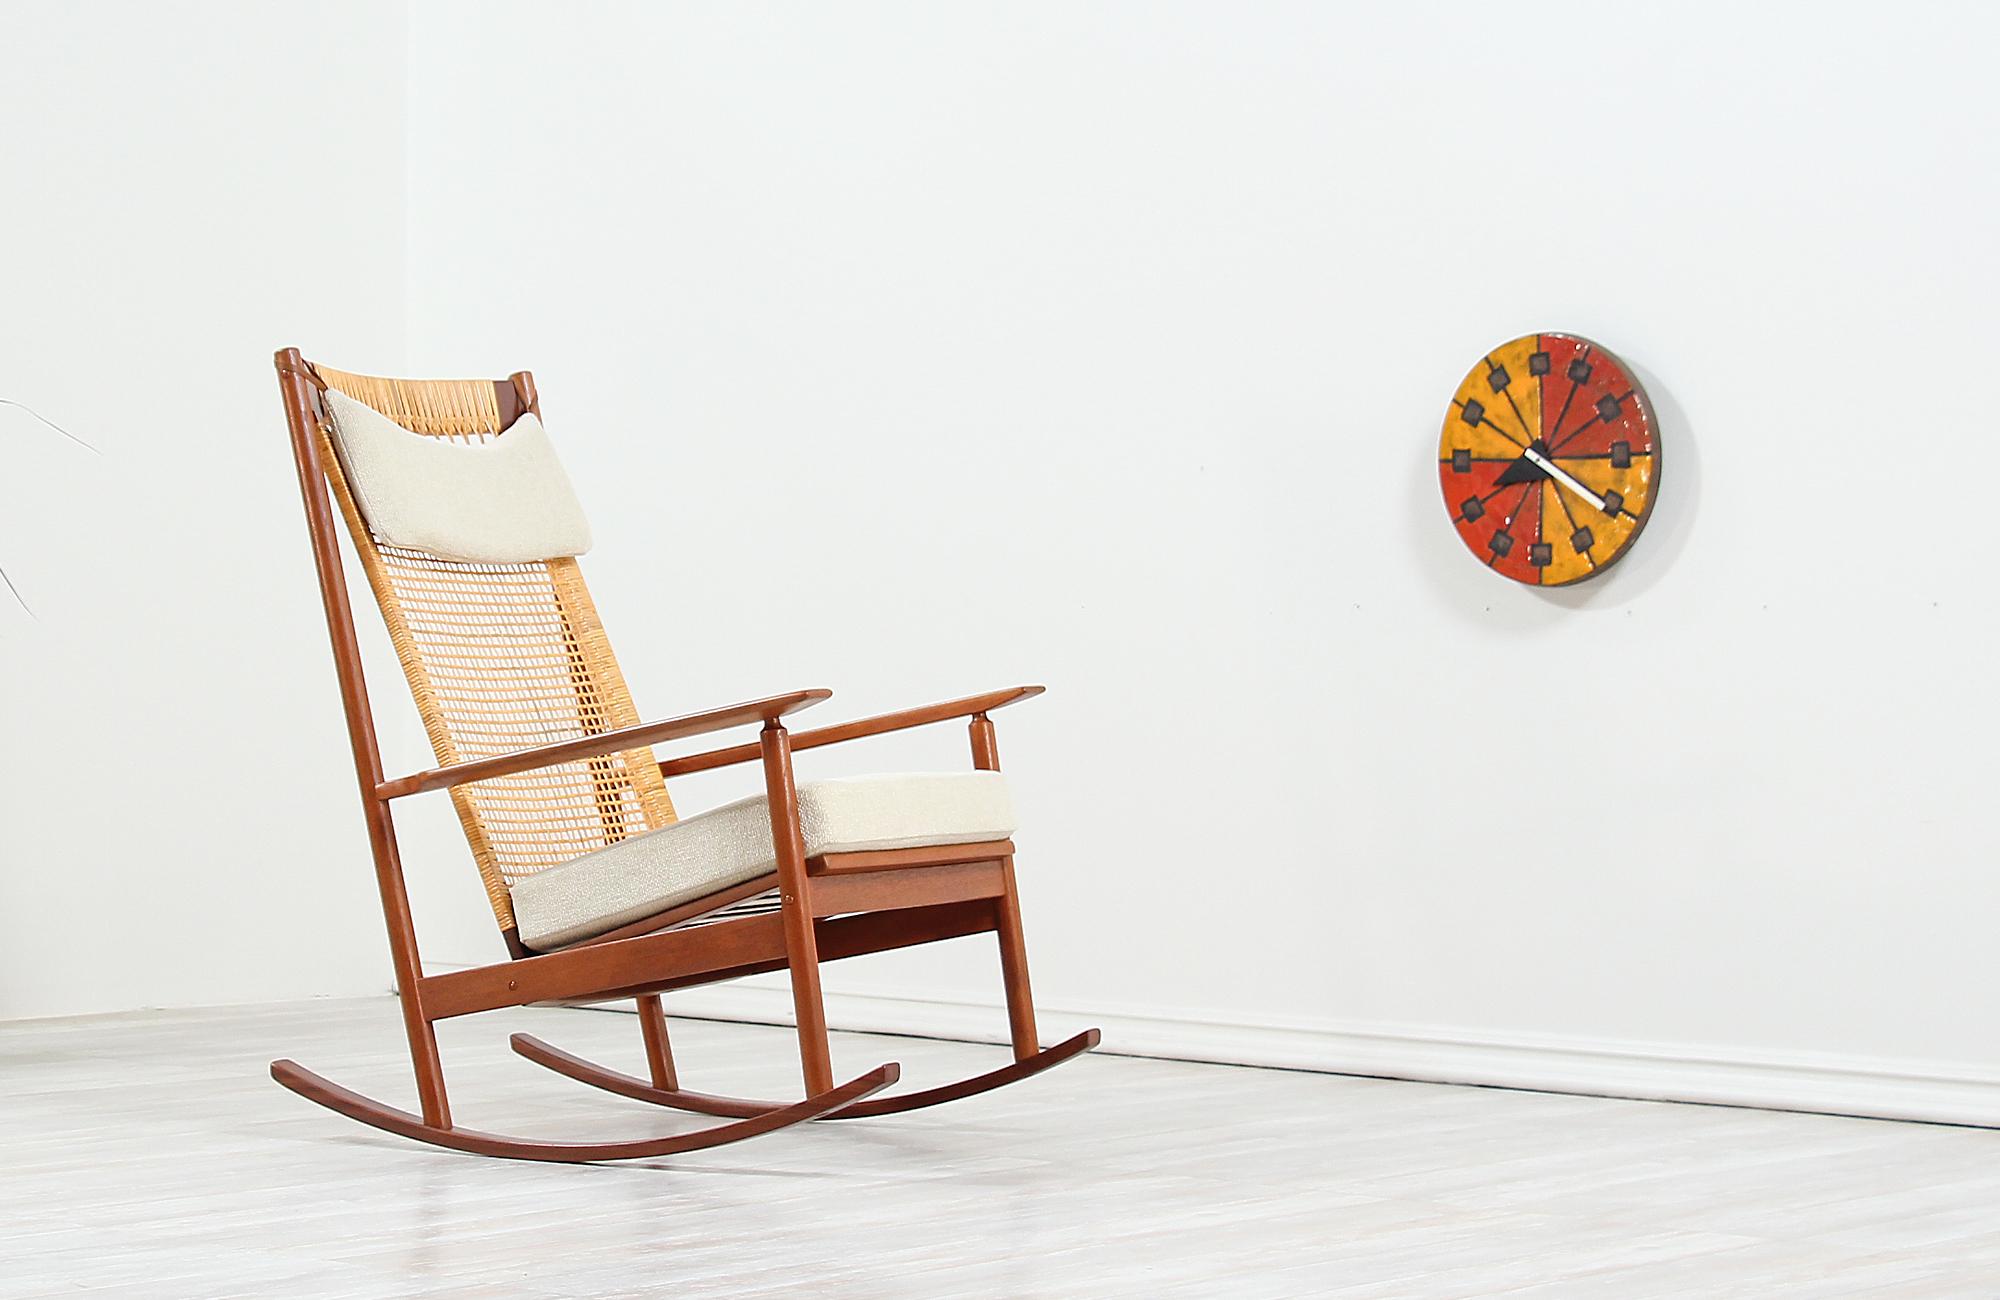 Stunning modern rocking chair designed by Hans Olsen for Juul Kristensen in Denmark, circa 1960s. This iconic Danish modern rocker design is crafted in solid teak wood featuring new hand weaved cane backrest and springs for sturdy support. The